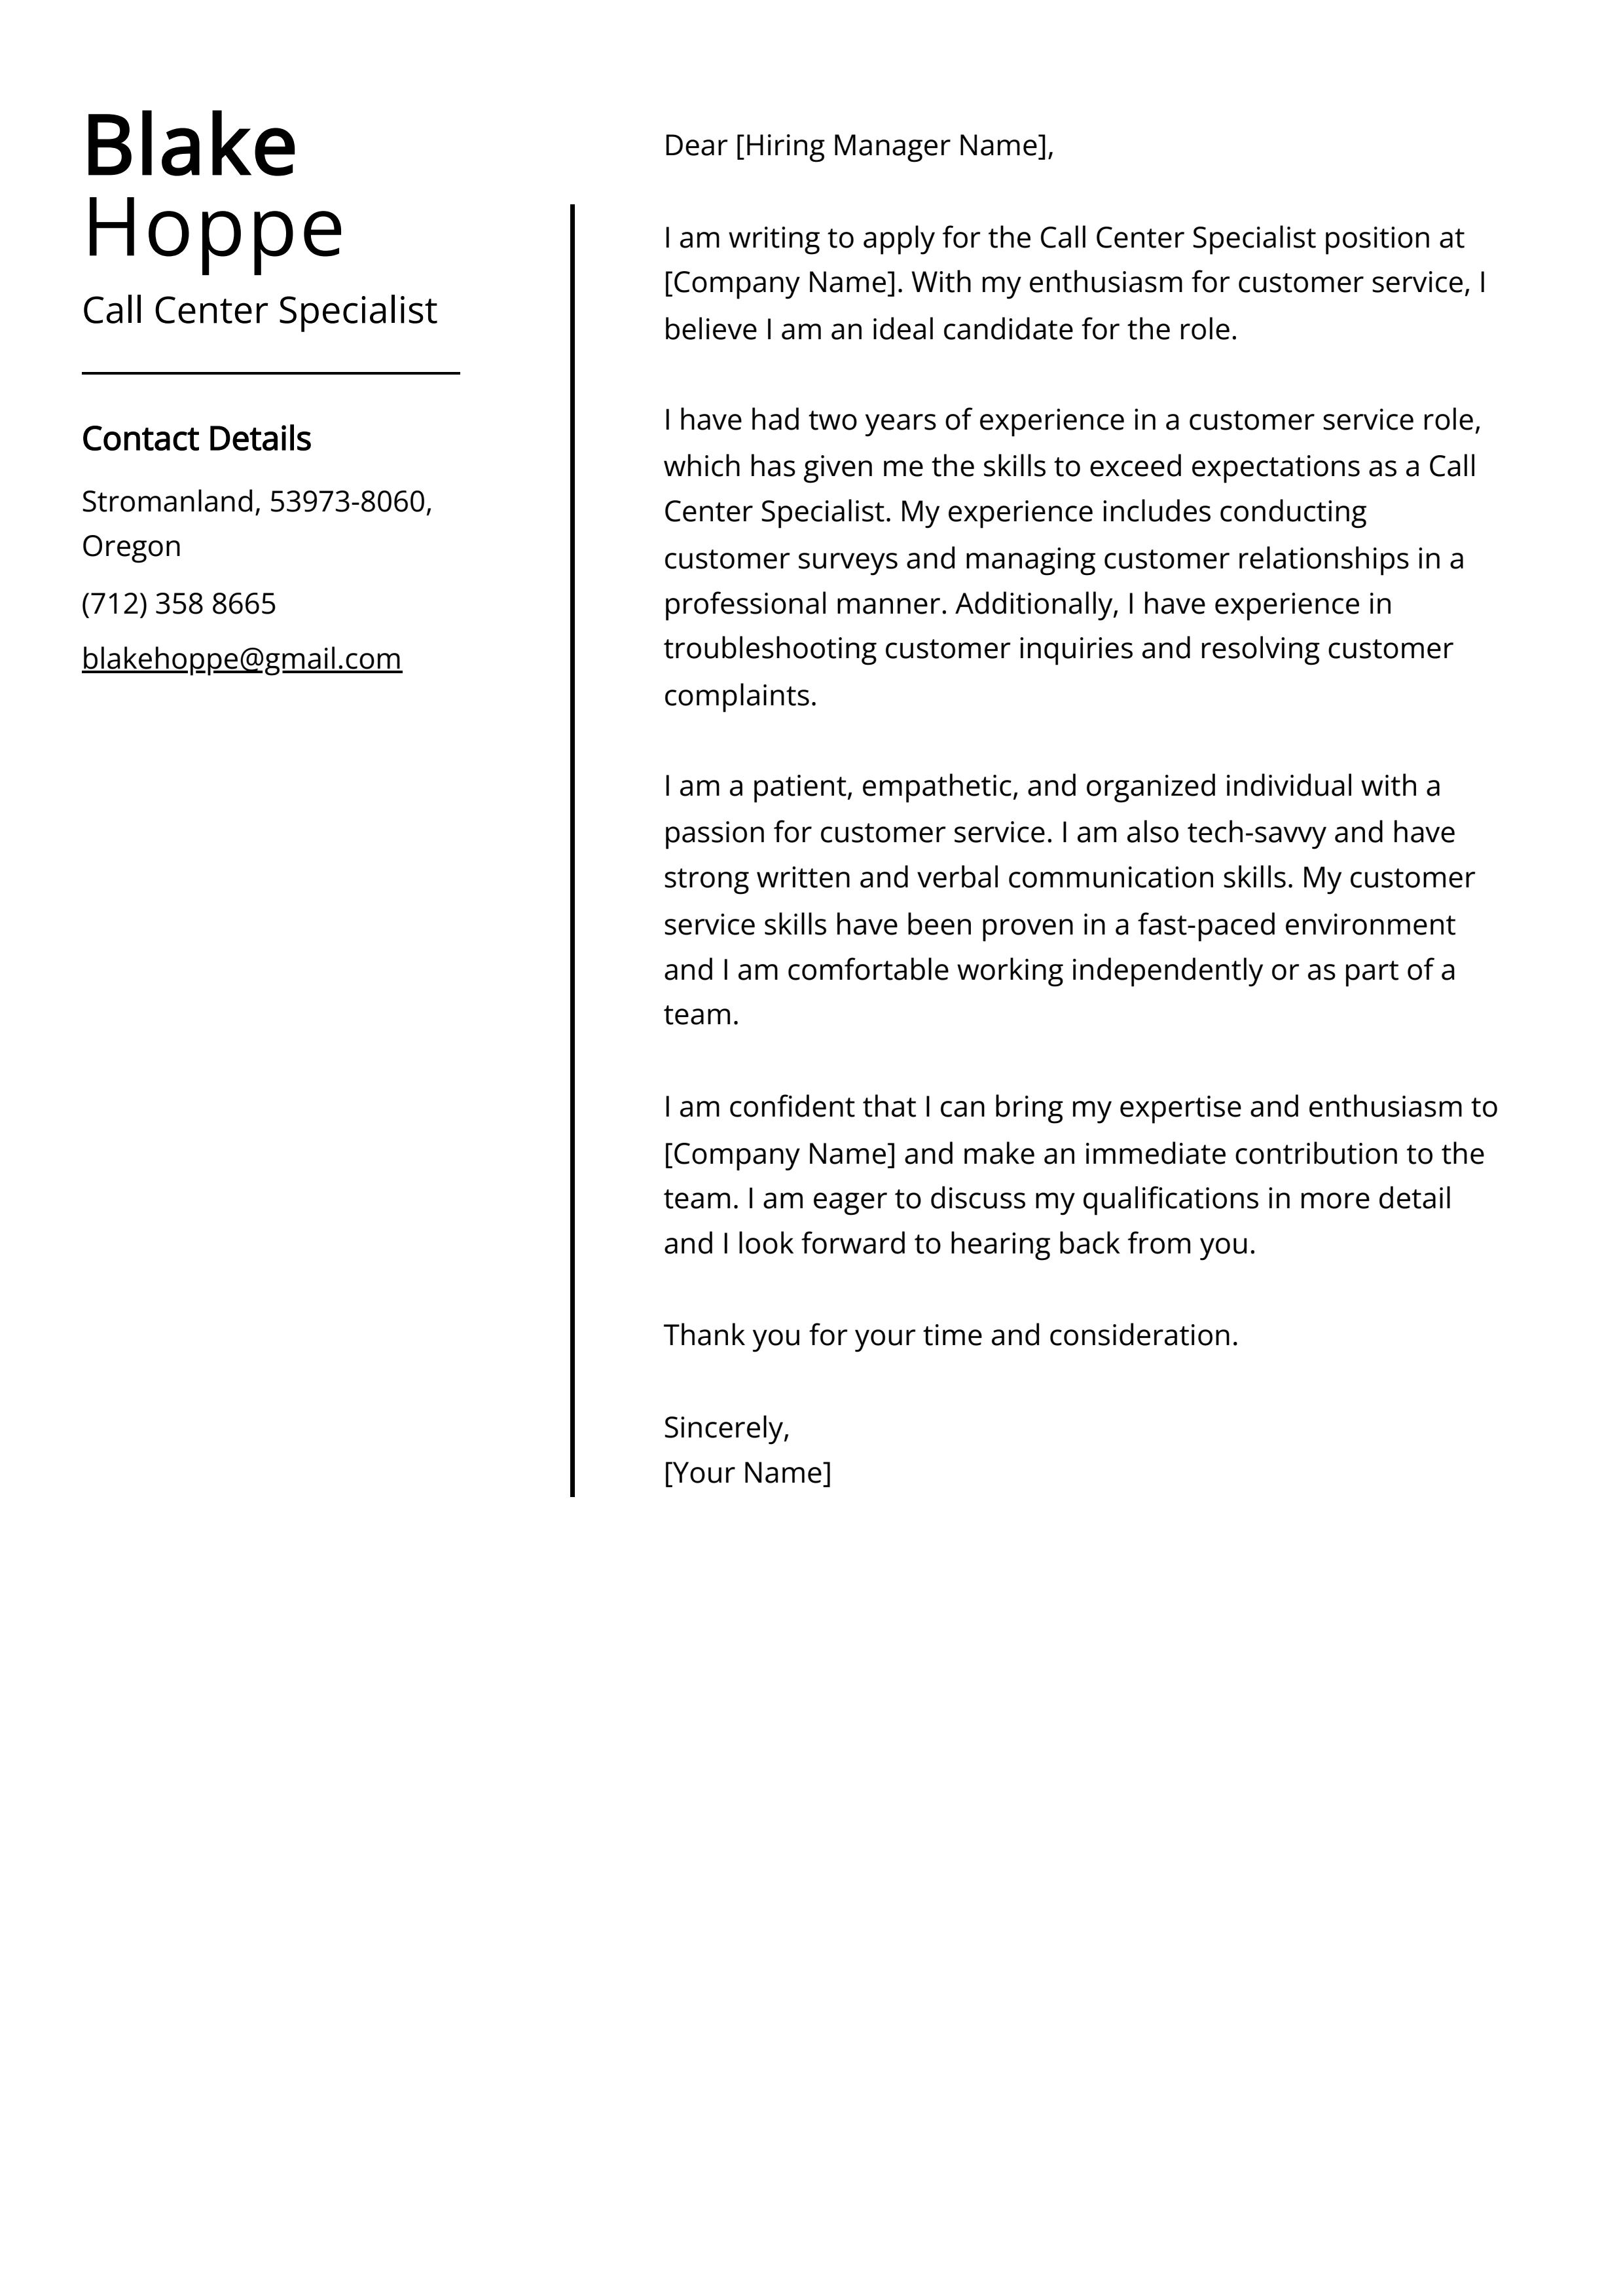 Call Center Specialist Cover Letter Example